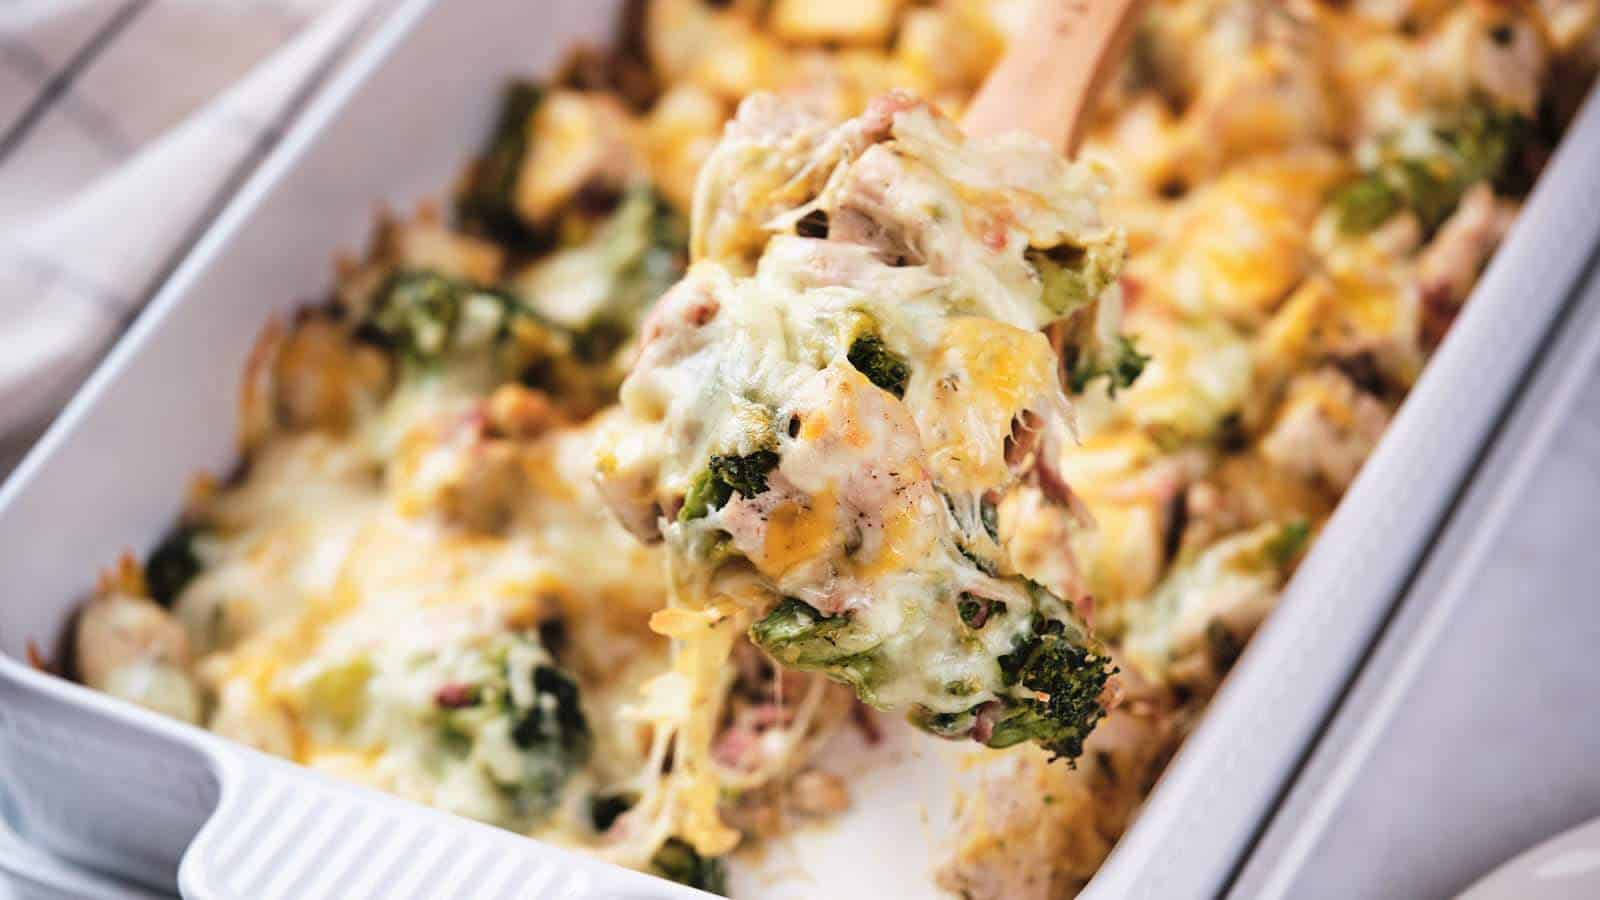 Fork lifting a cheesy bite from a plate of baked chicken and broccoli casserole.